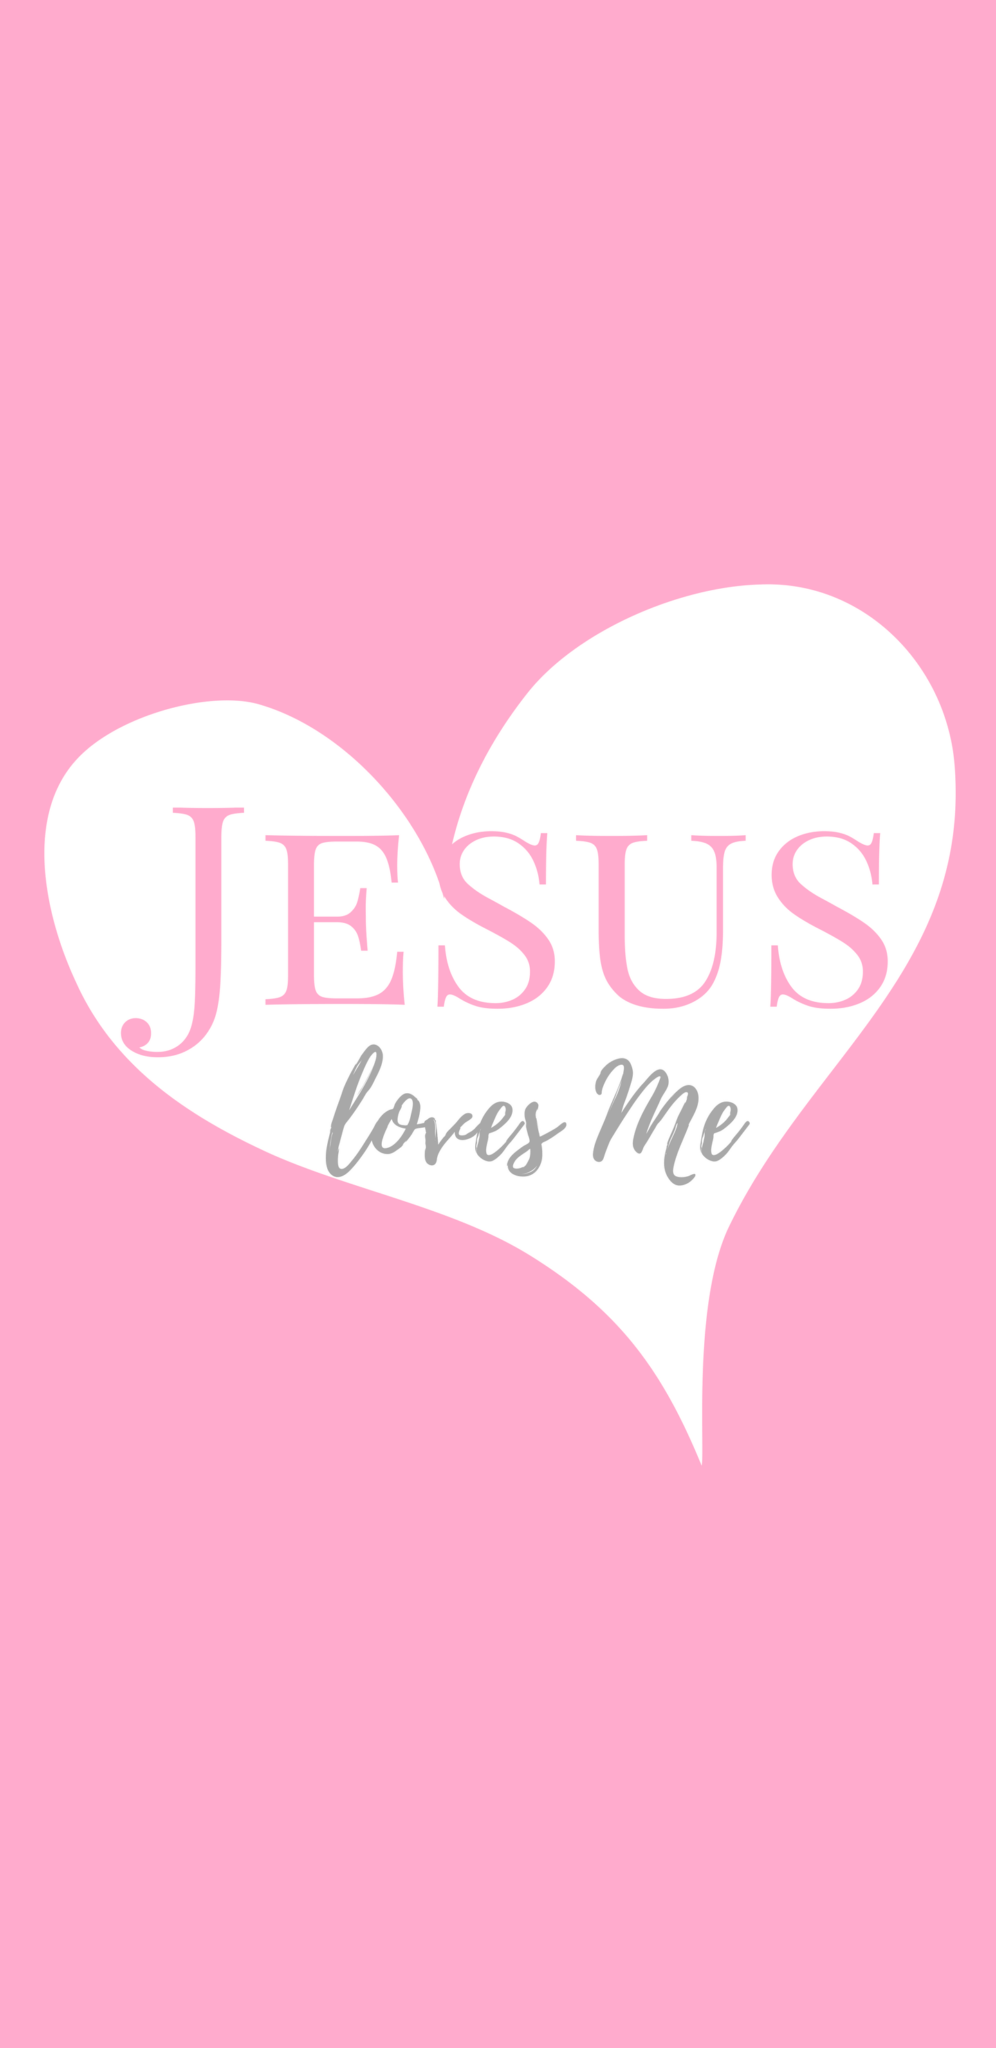 A pink heart with the words jesus lovess me - Jesus, Christian